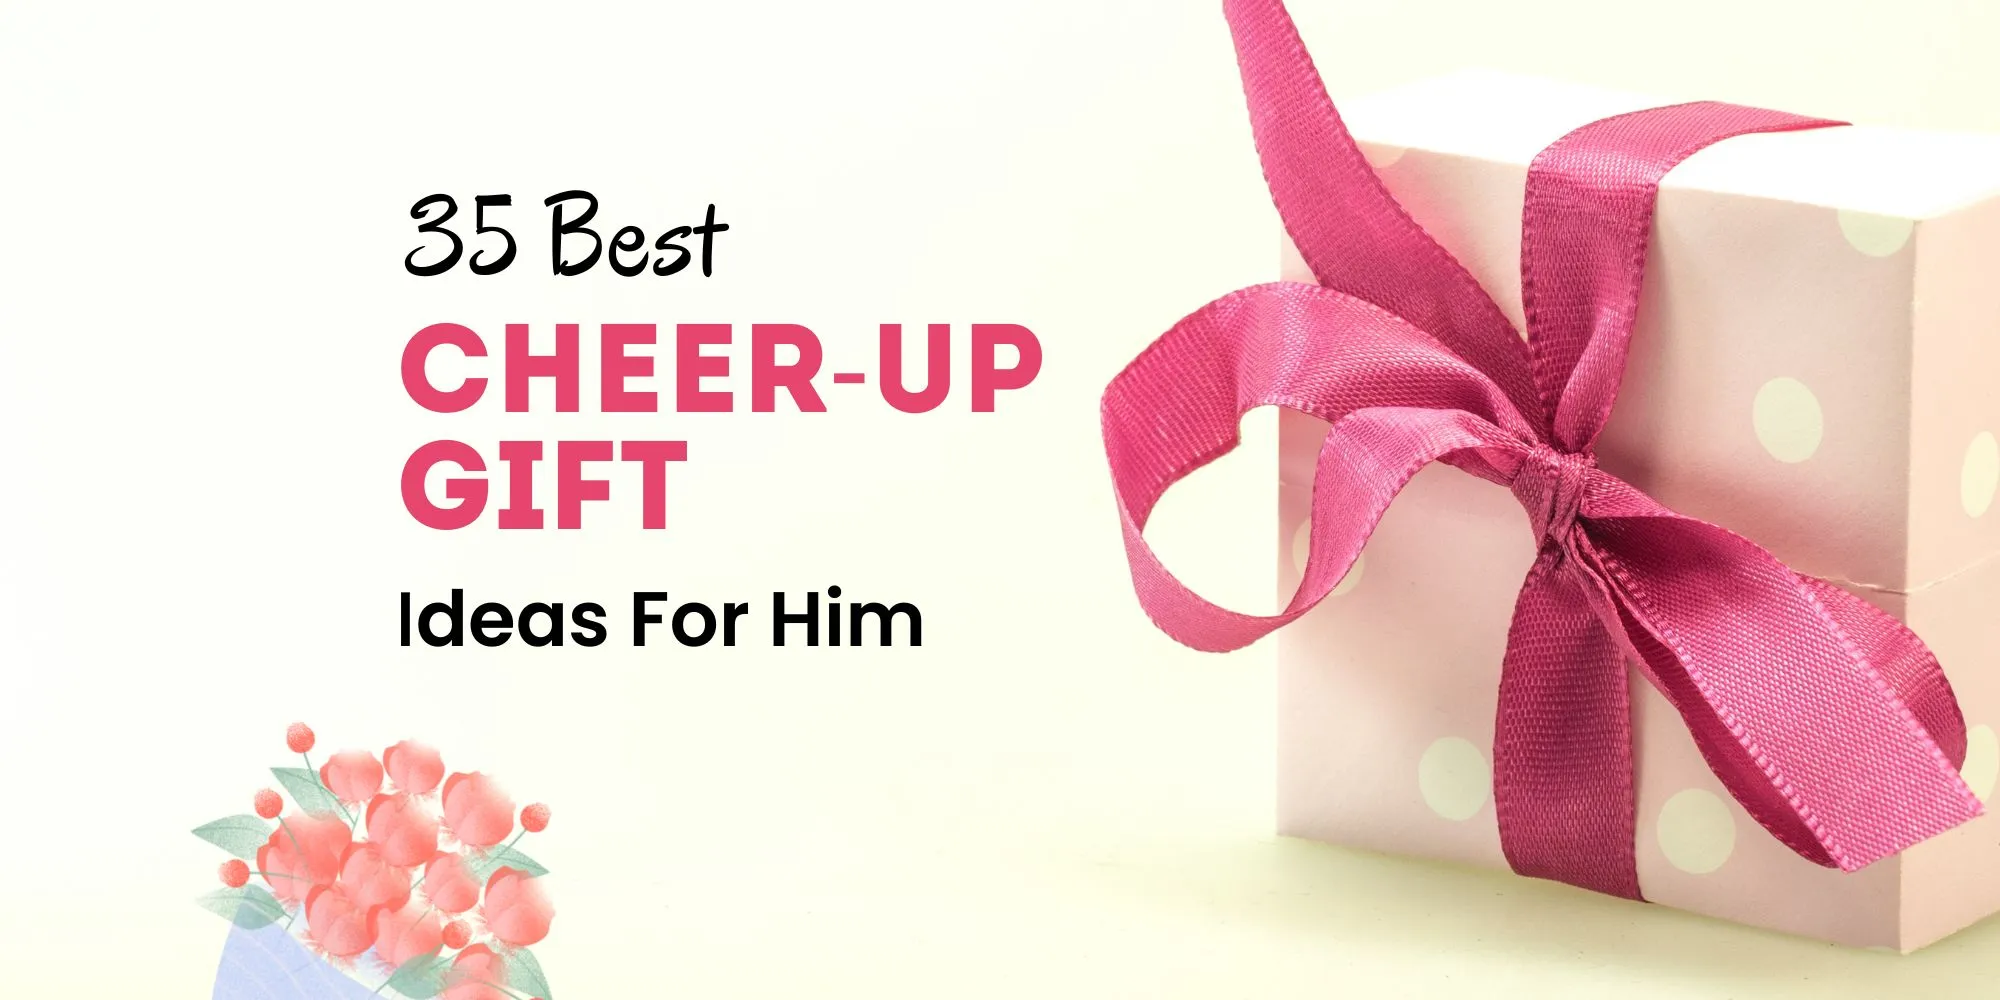 35 Best Cheer-up Gift Ideas For Him